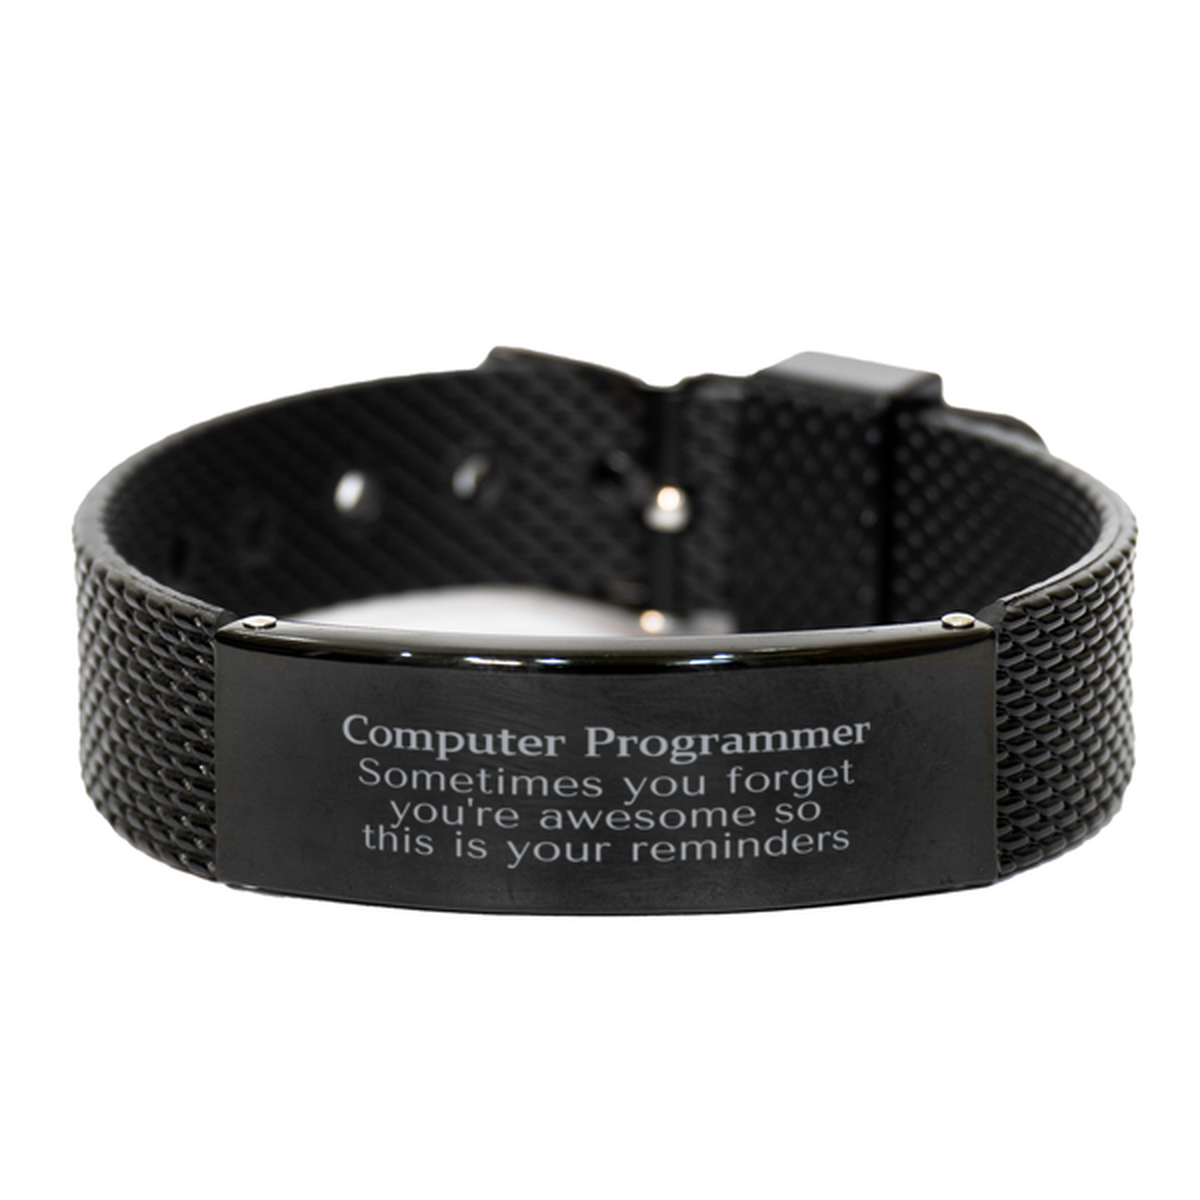 Sentimental Computer Programmer Black Shark Mesh Bracelet, Computer Programmer Sometimes you forget you're awesome so this is your reminders, Graduation Christmas Birthday Gifts for Computer Programmer, Men, Women, Coworkers